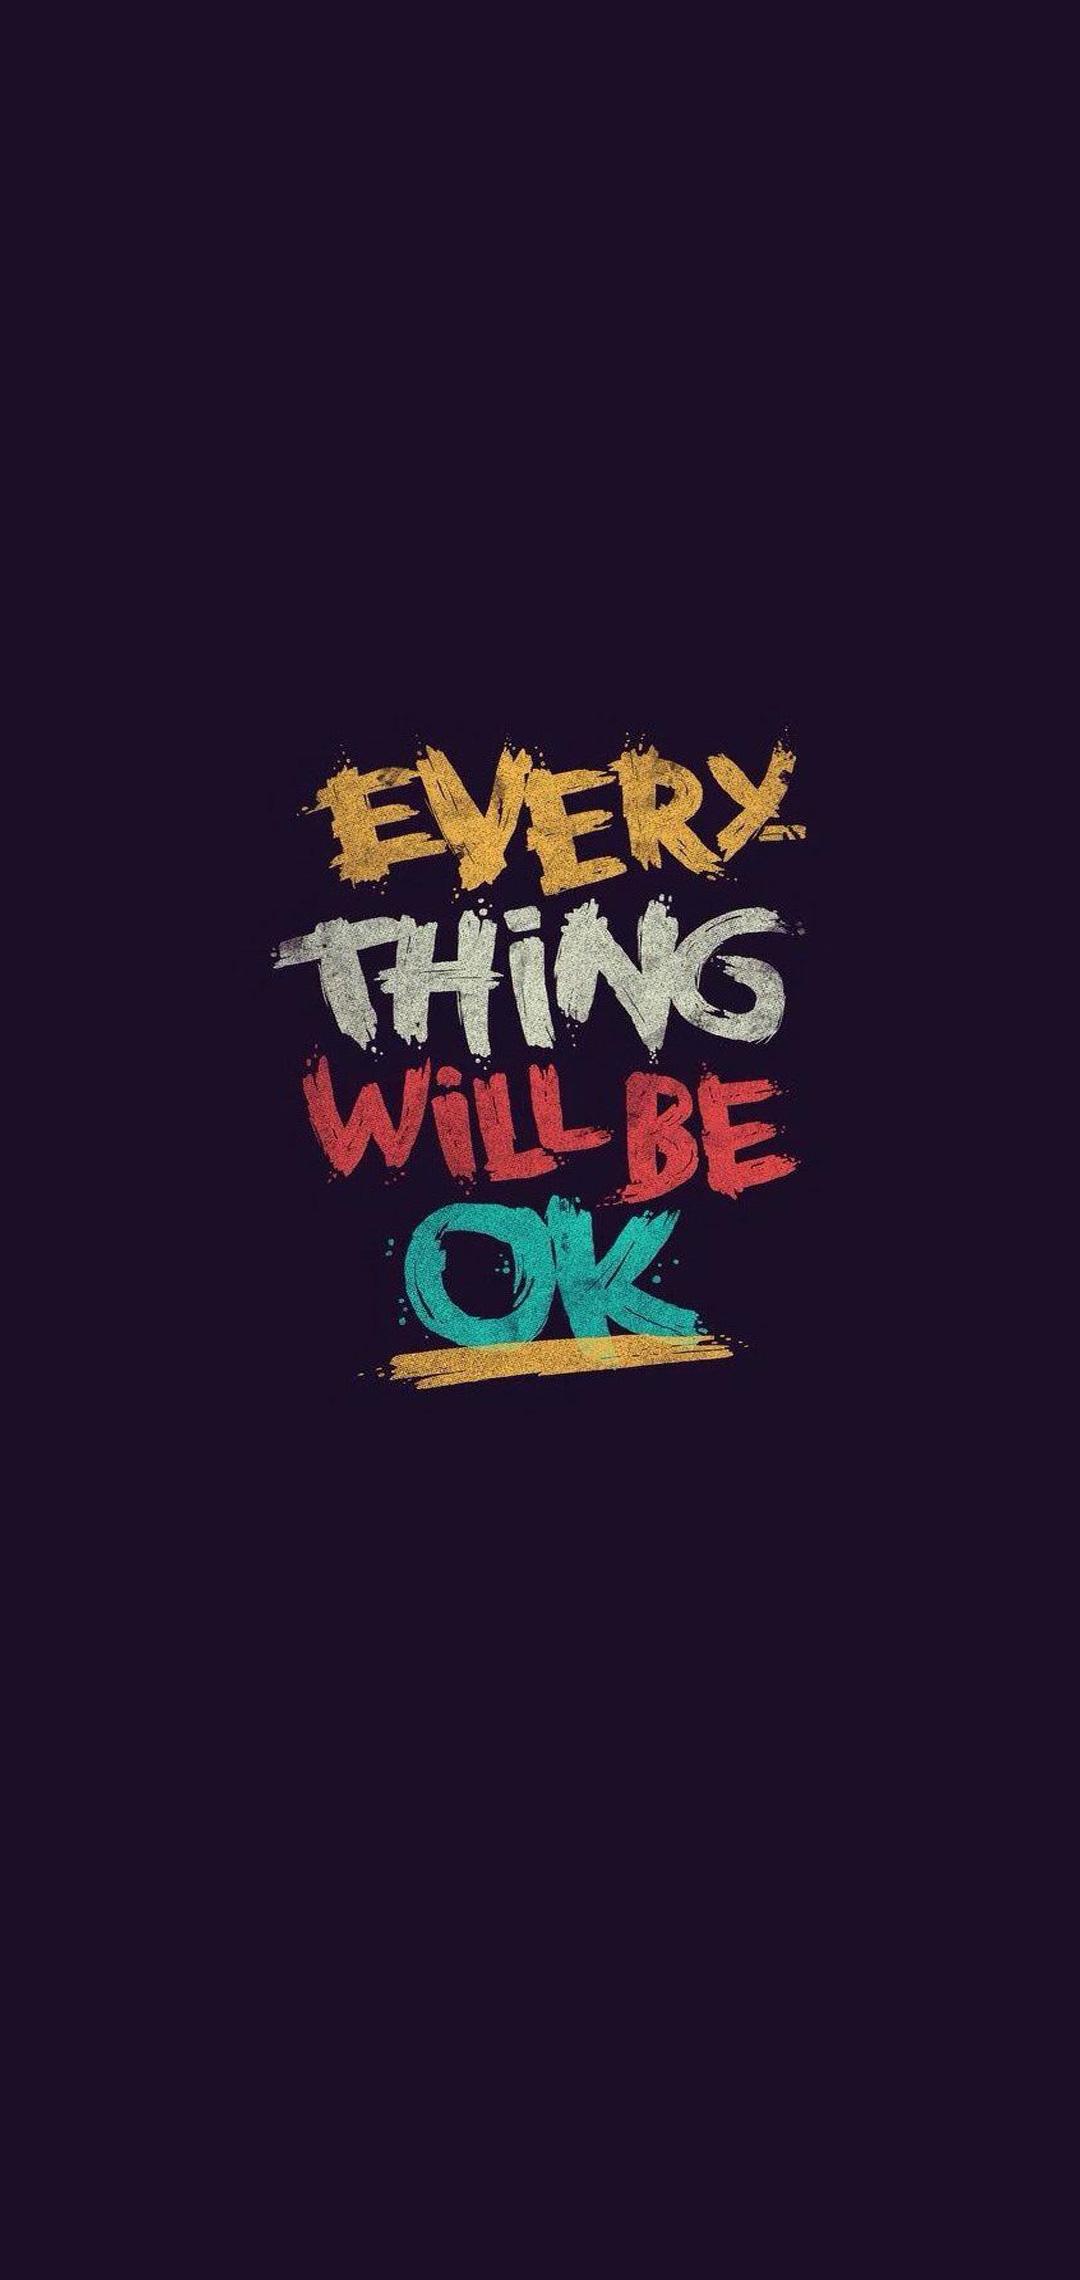 Minimal Wallpaper Hd For Phone 015 - Everything Will Be Ok Iphone - HD Wallpaper 